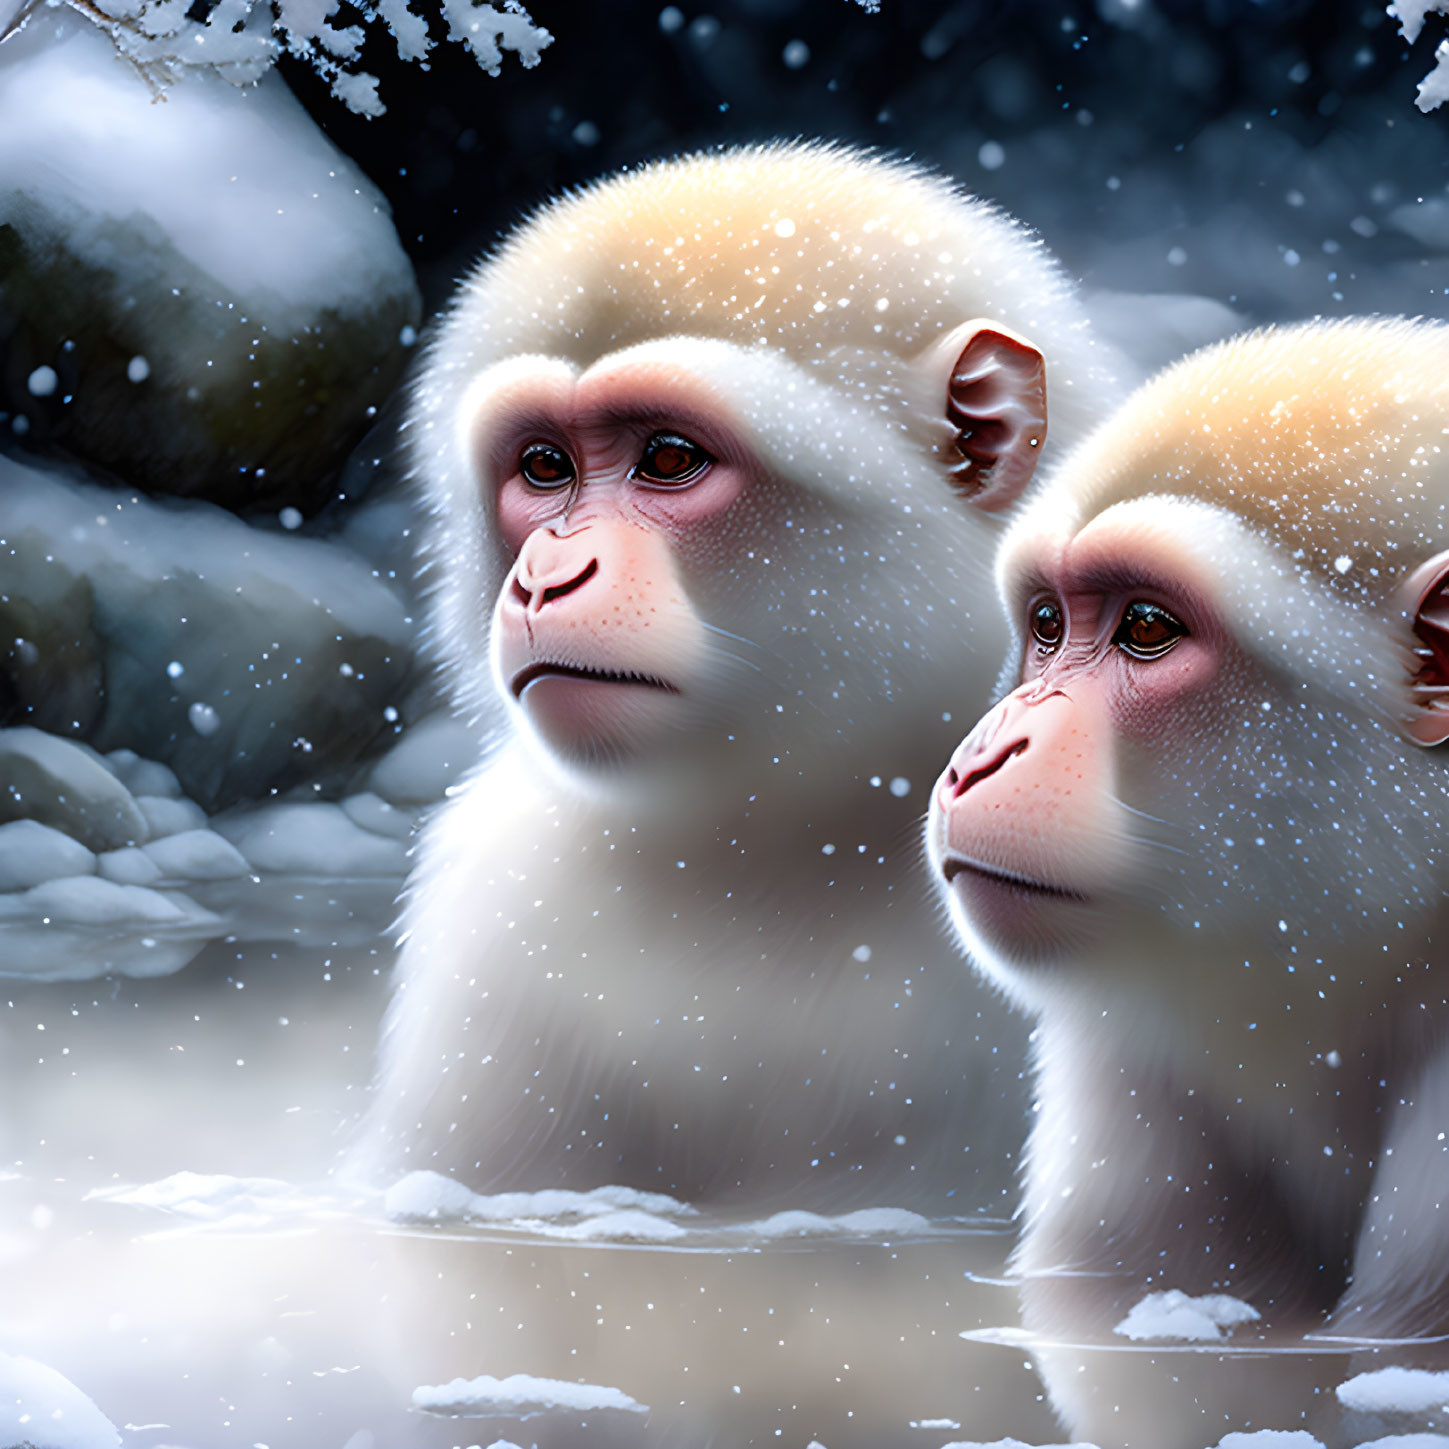 Japanese Snow Monkeys in a Hot Spring